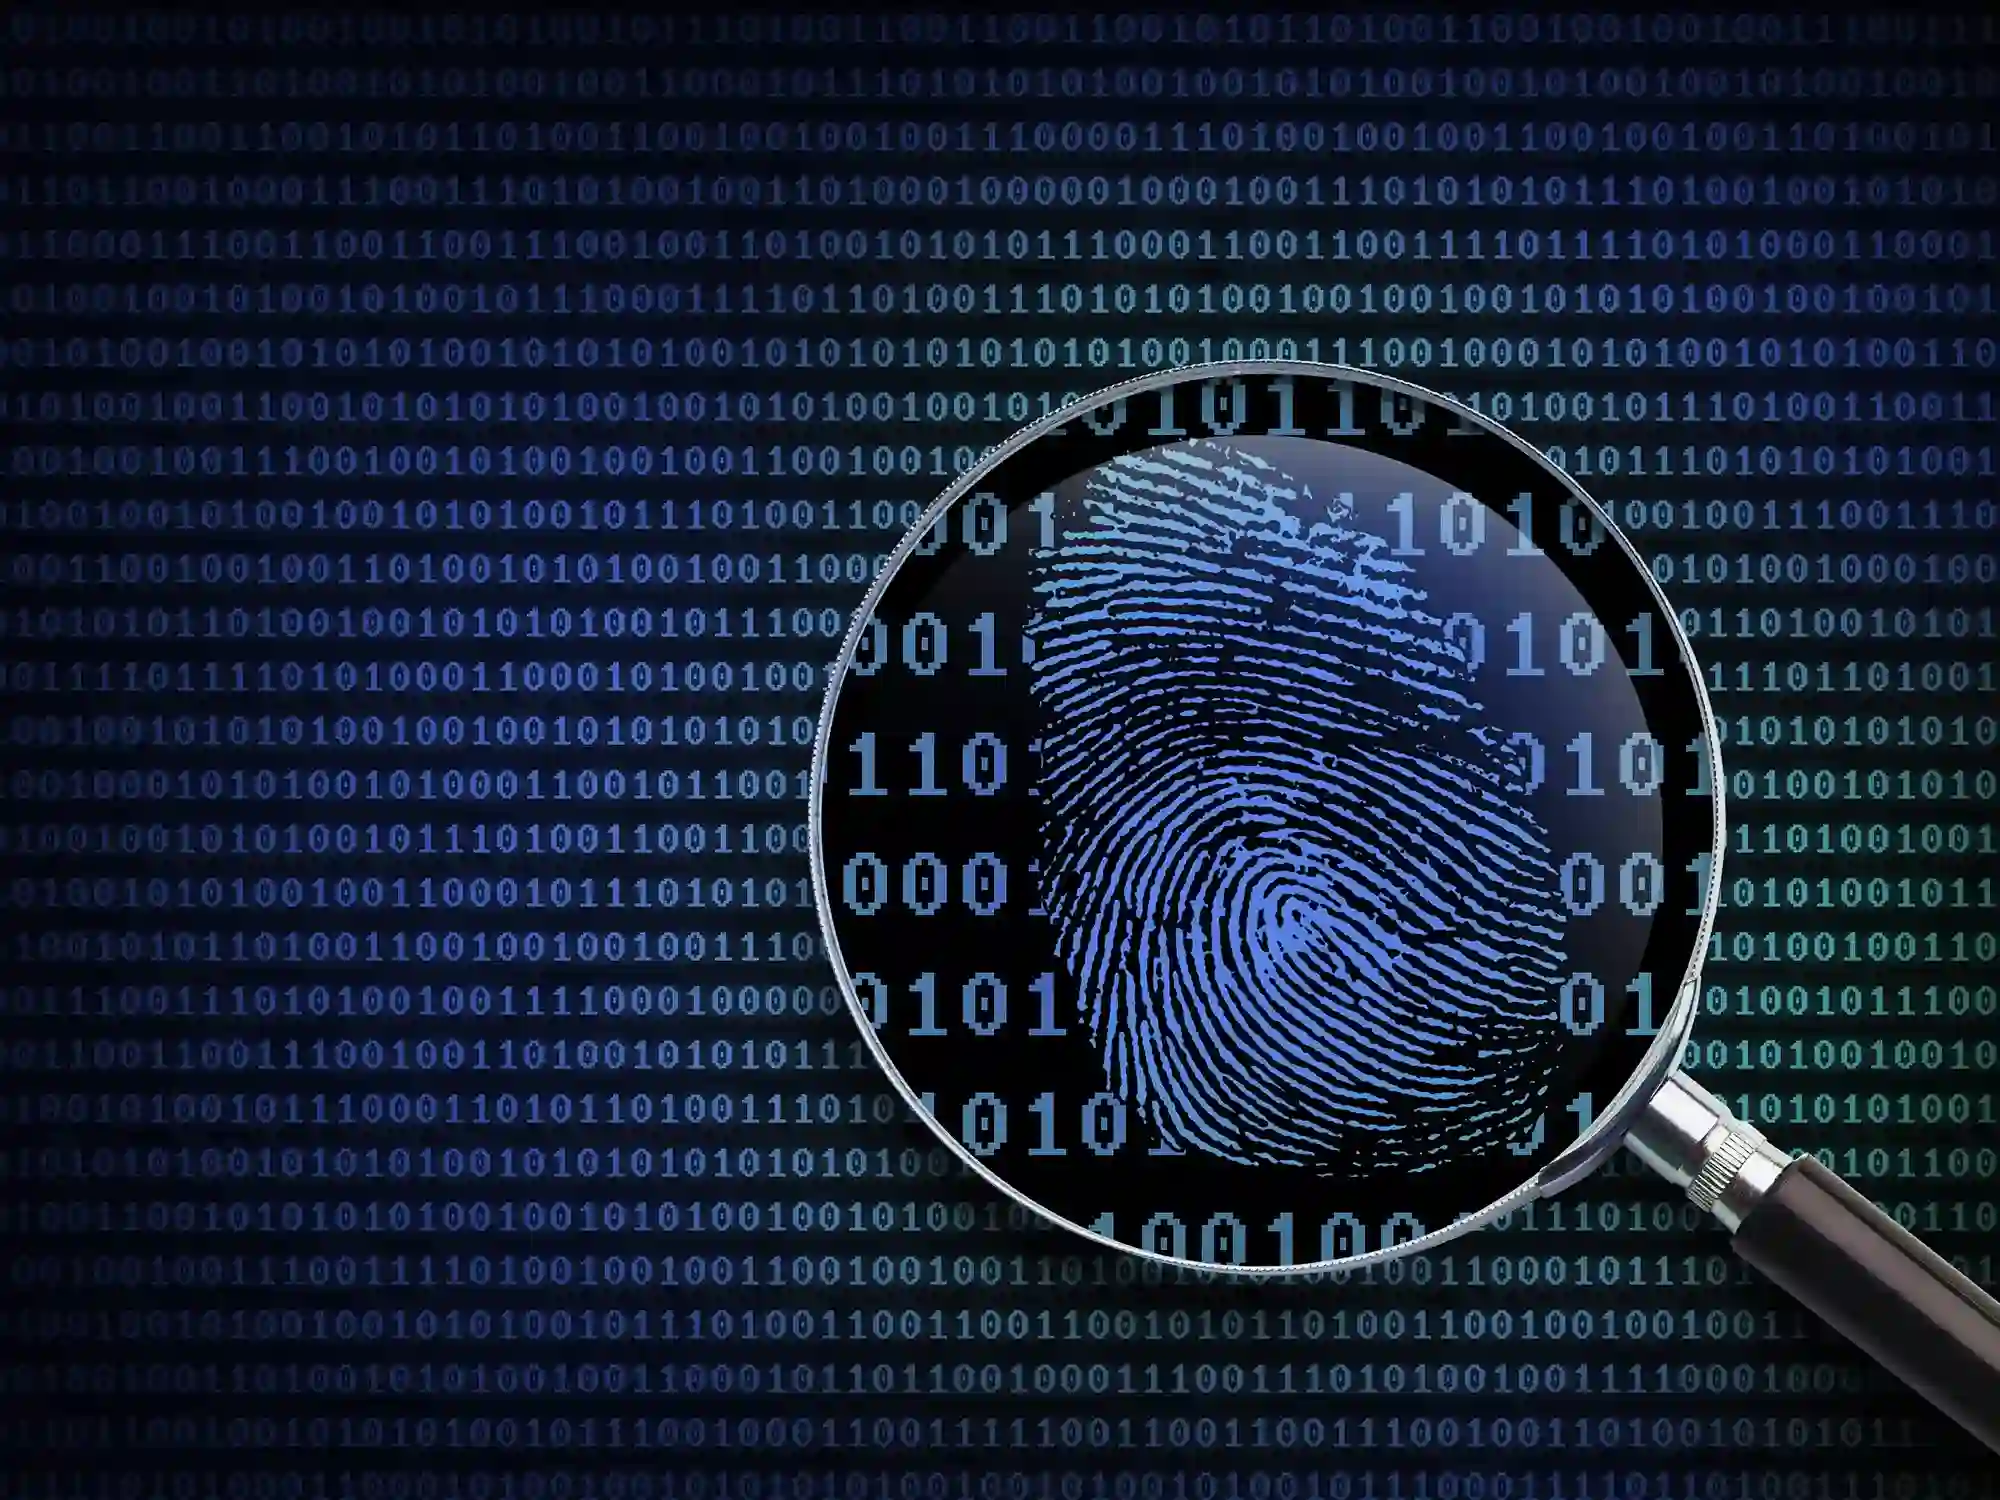 Digital Forensics and Incident Response